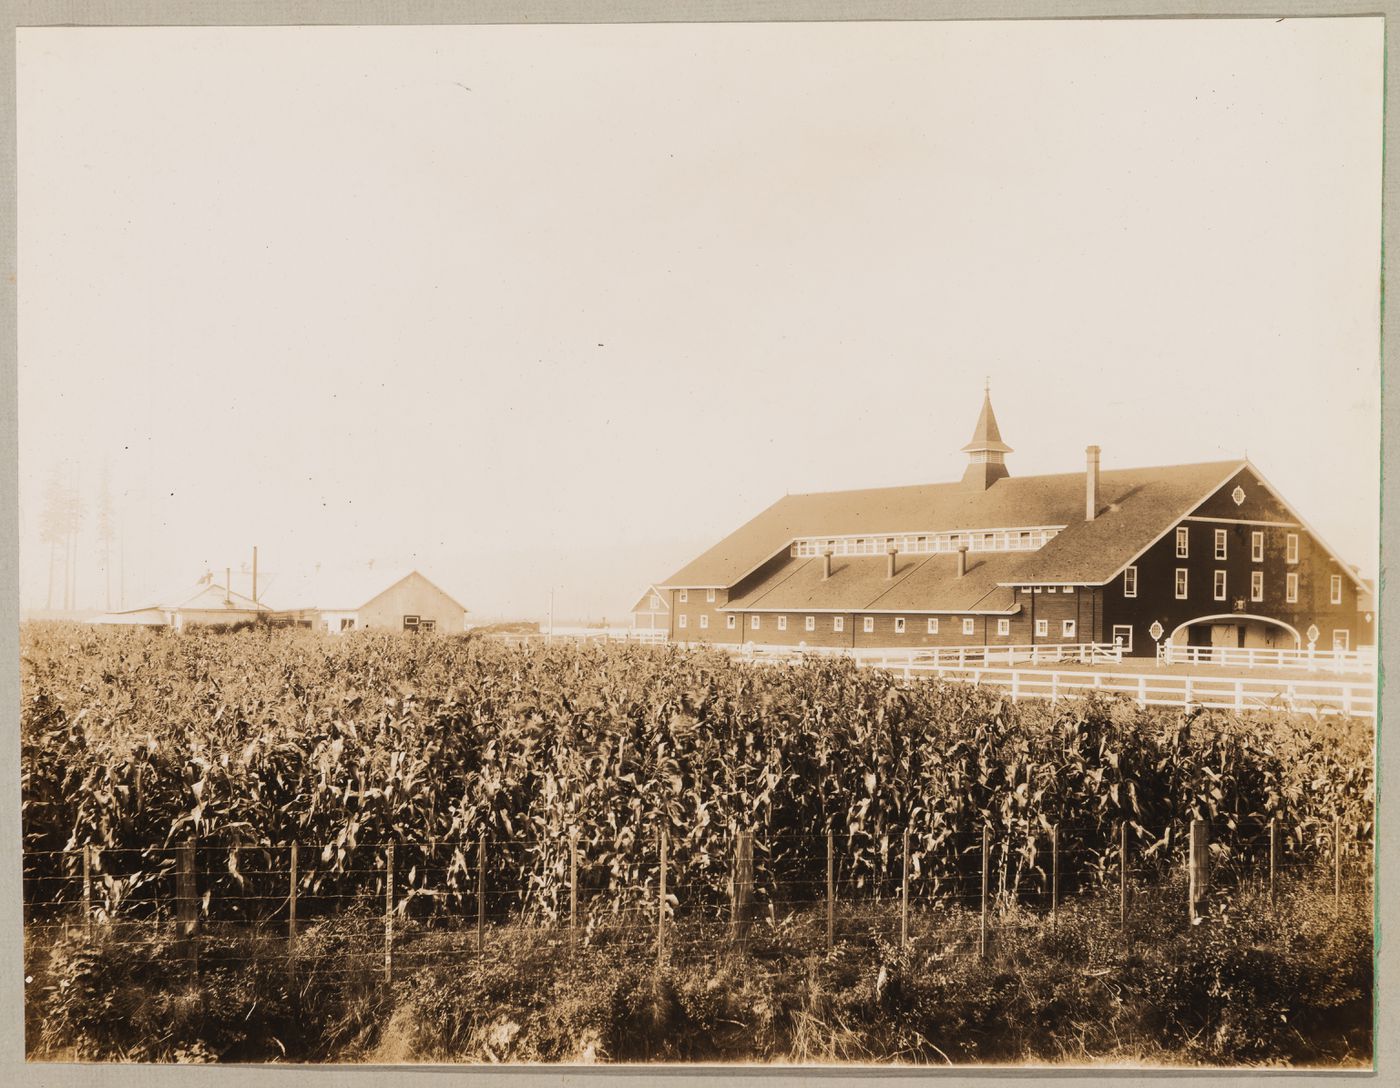 View of the Provincial Government Demonstration Farm (also known as the Colony Farm) showing stables [?], paddock, and outbuilding with cornfield in the foreground, Coquitlam (now Port Coquitlam), British Columbia, Canada